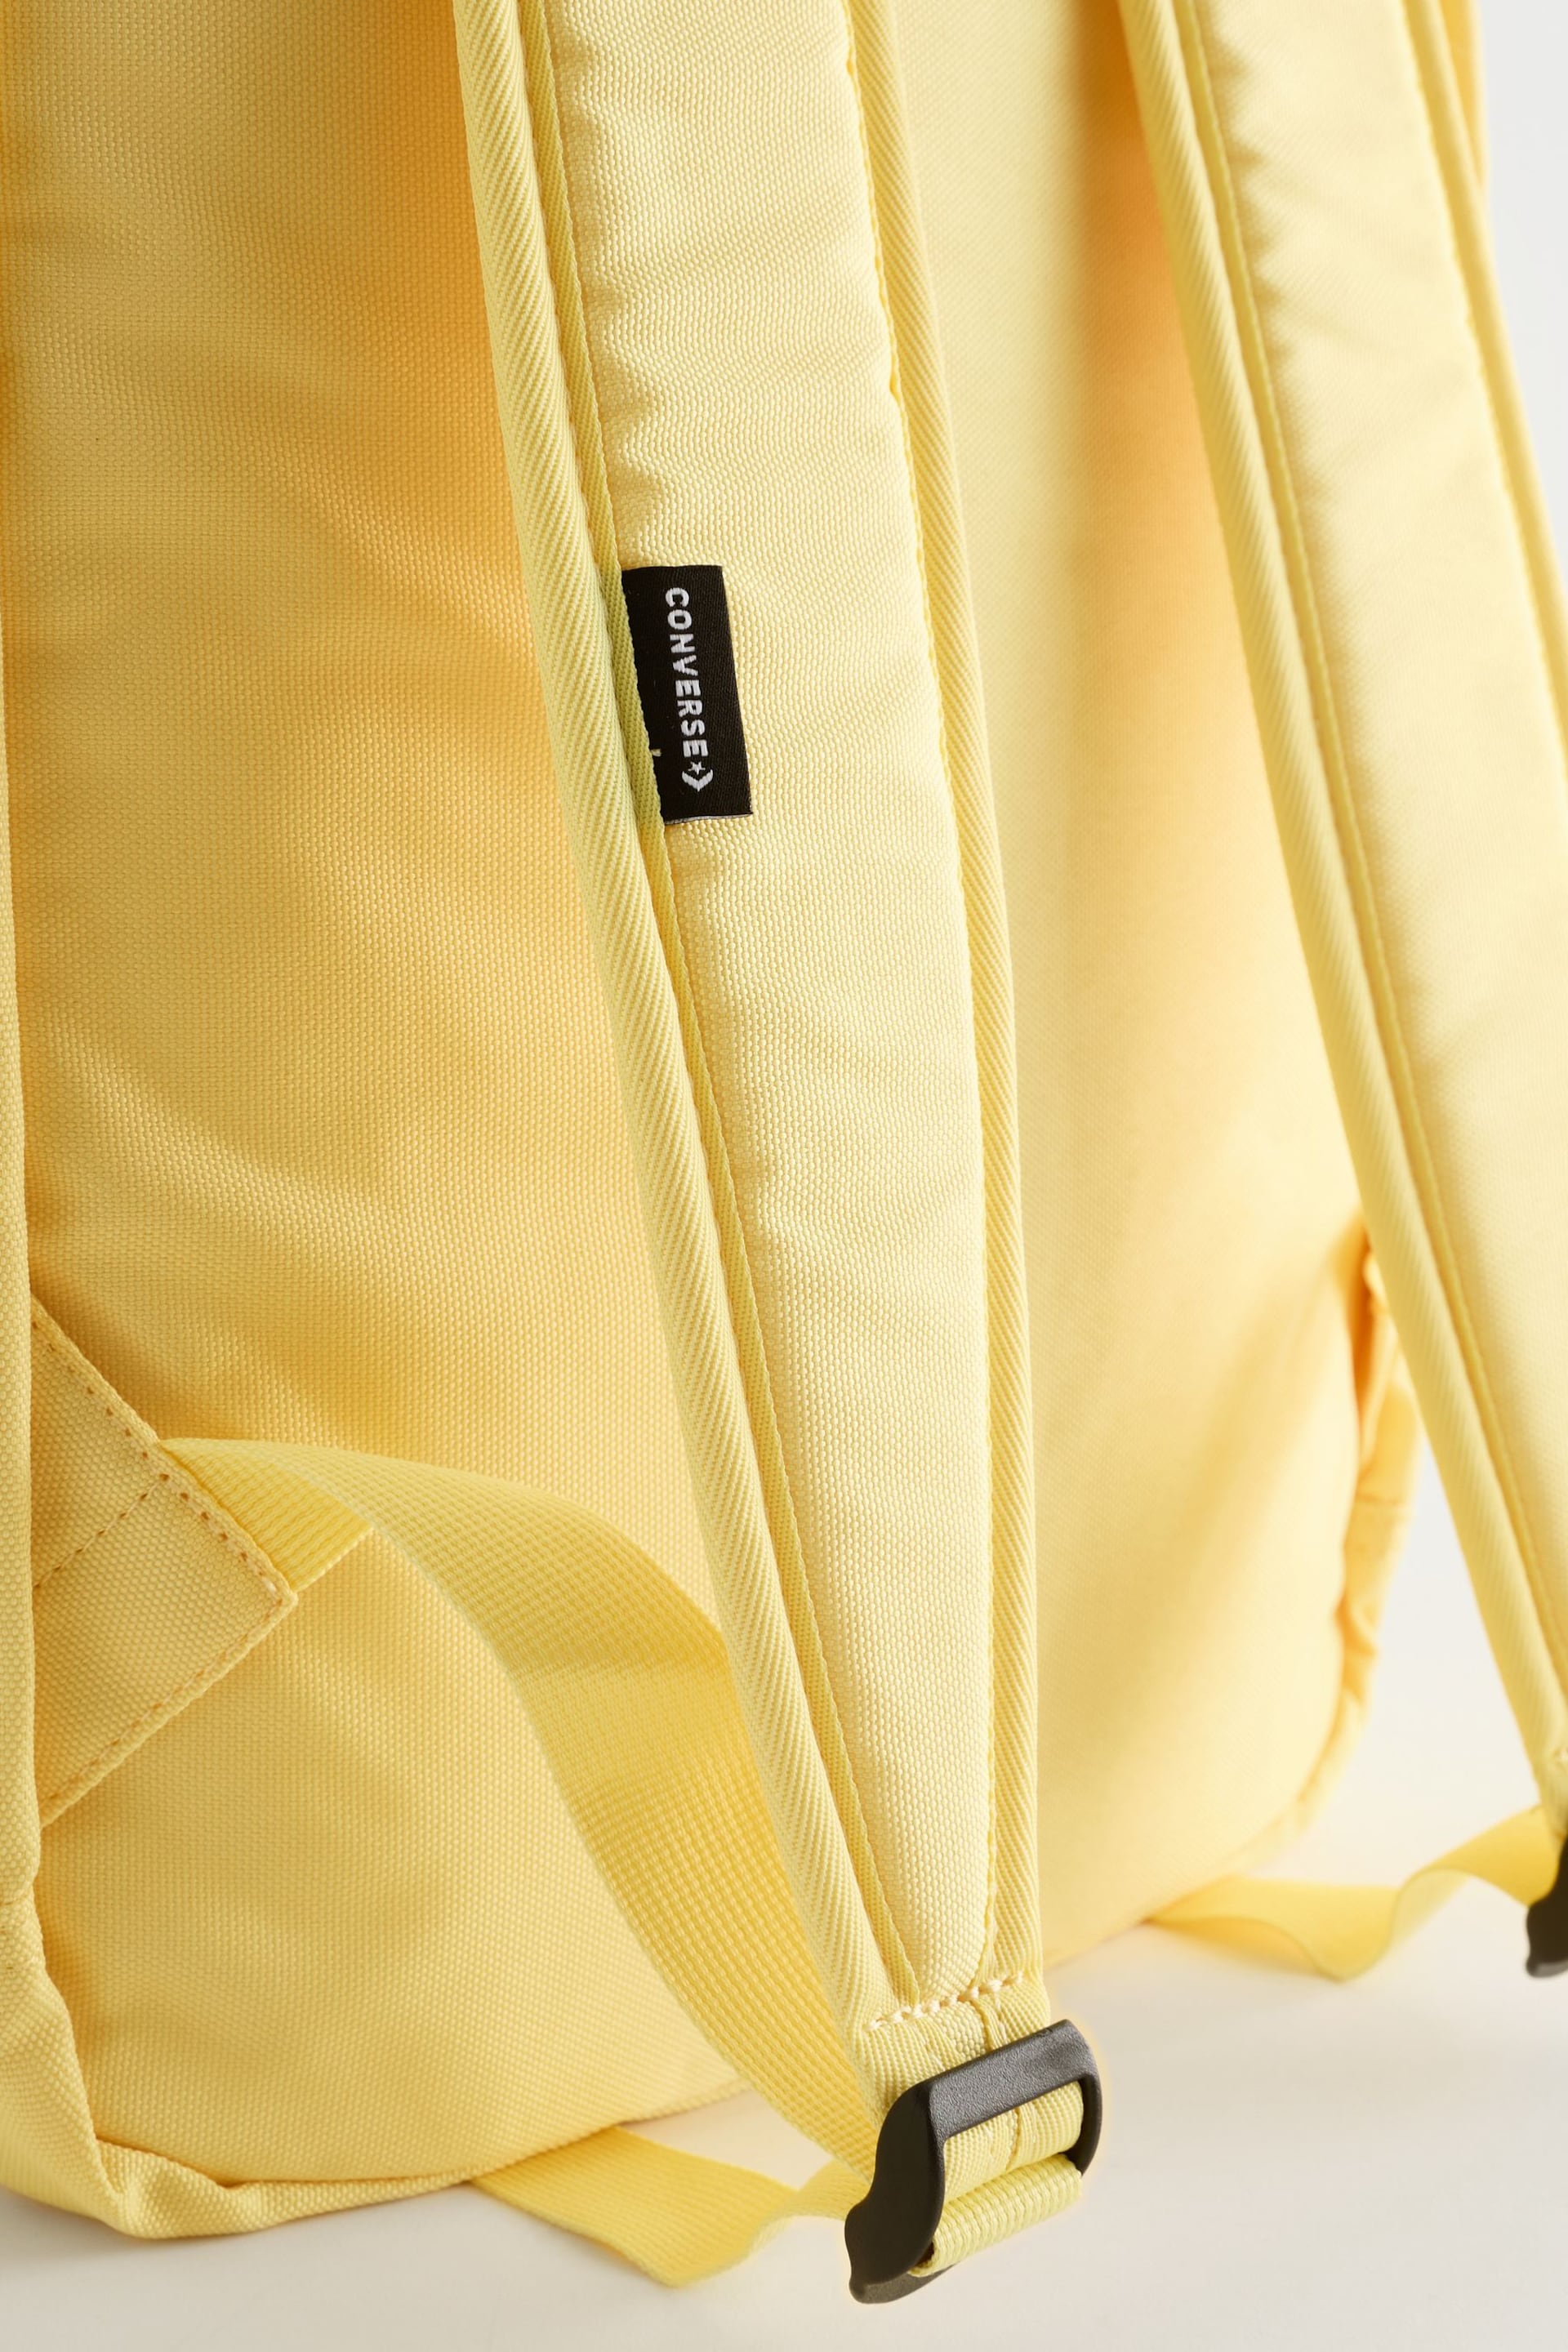 Converse Yellow Speed 3 Backpack - Image 4 of 5